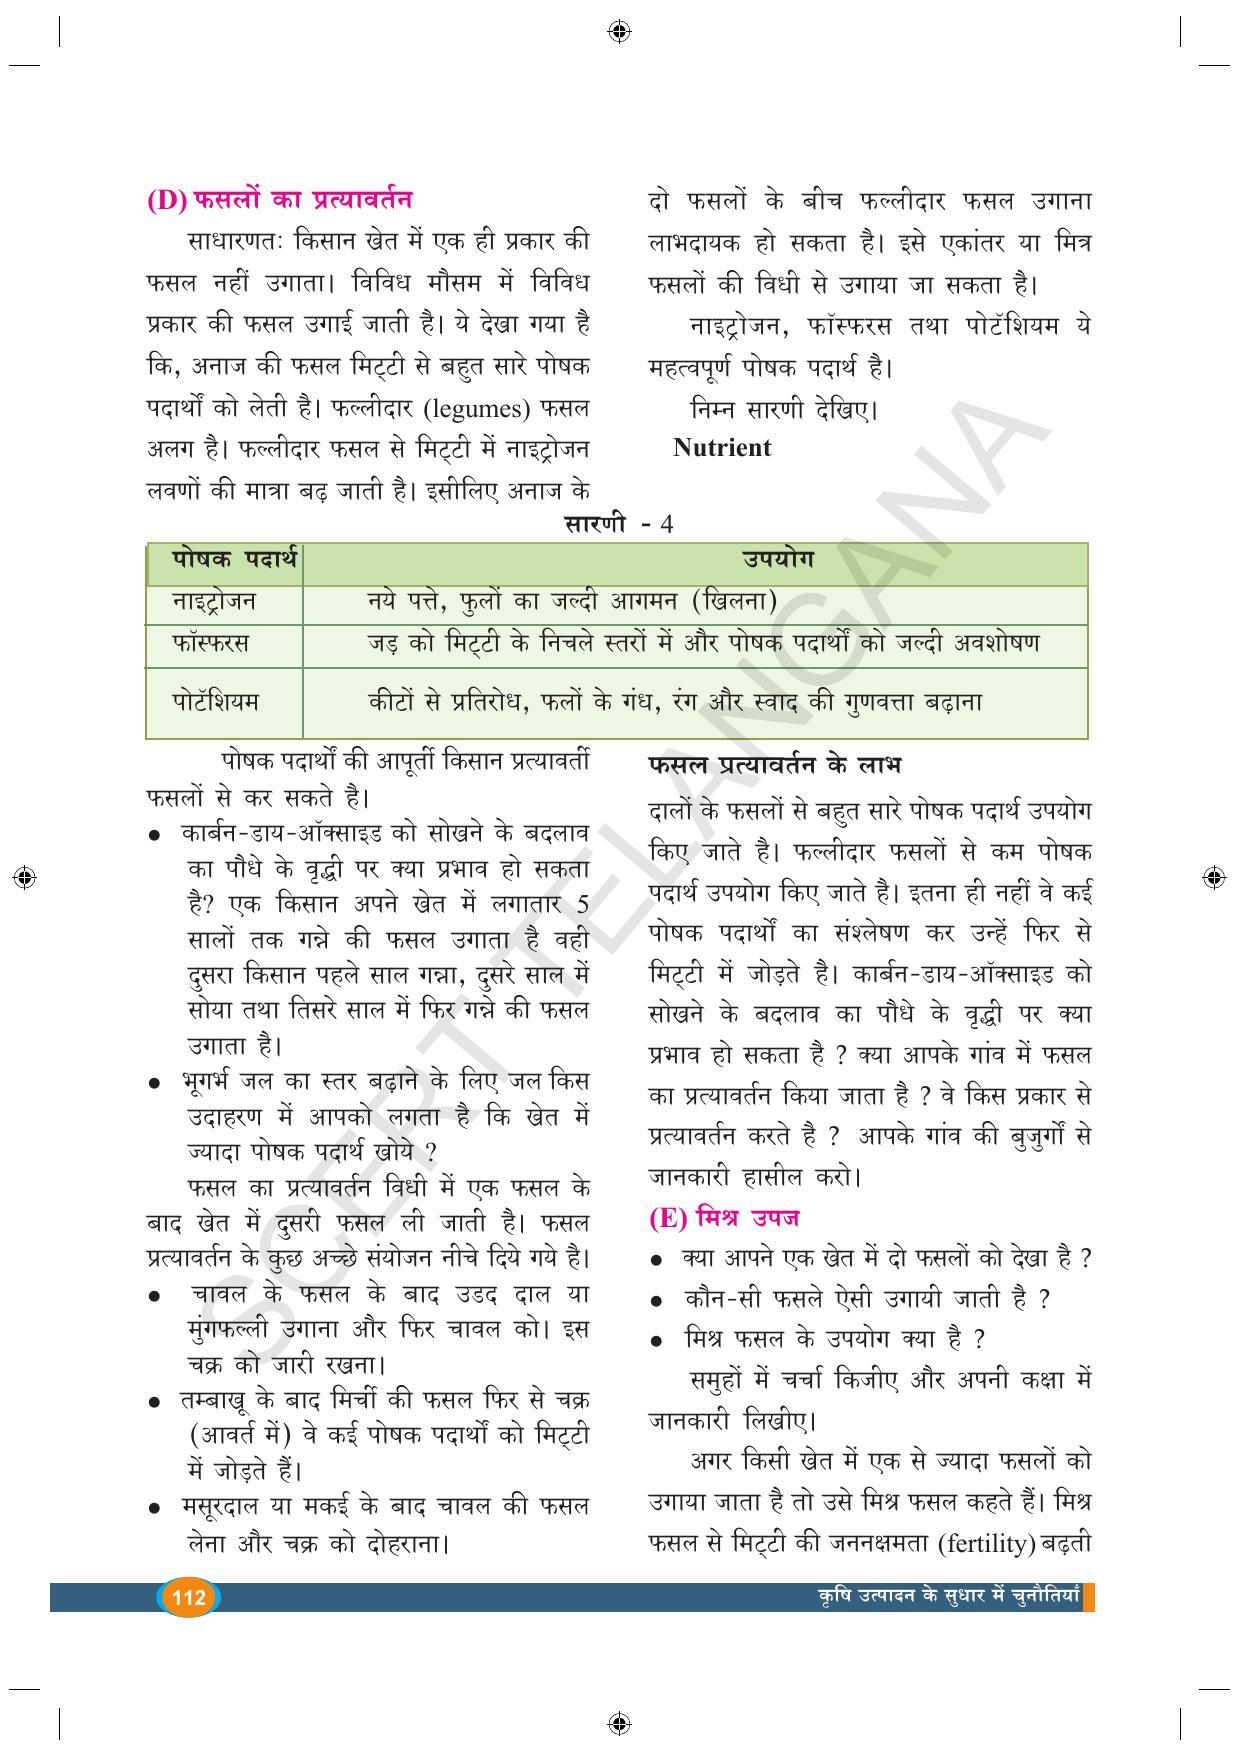 TS SCERT Class 9 Biological Science (Hindi Medium) Text Book - Page 124